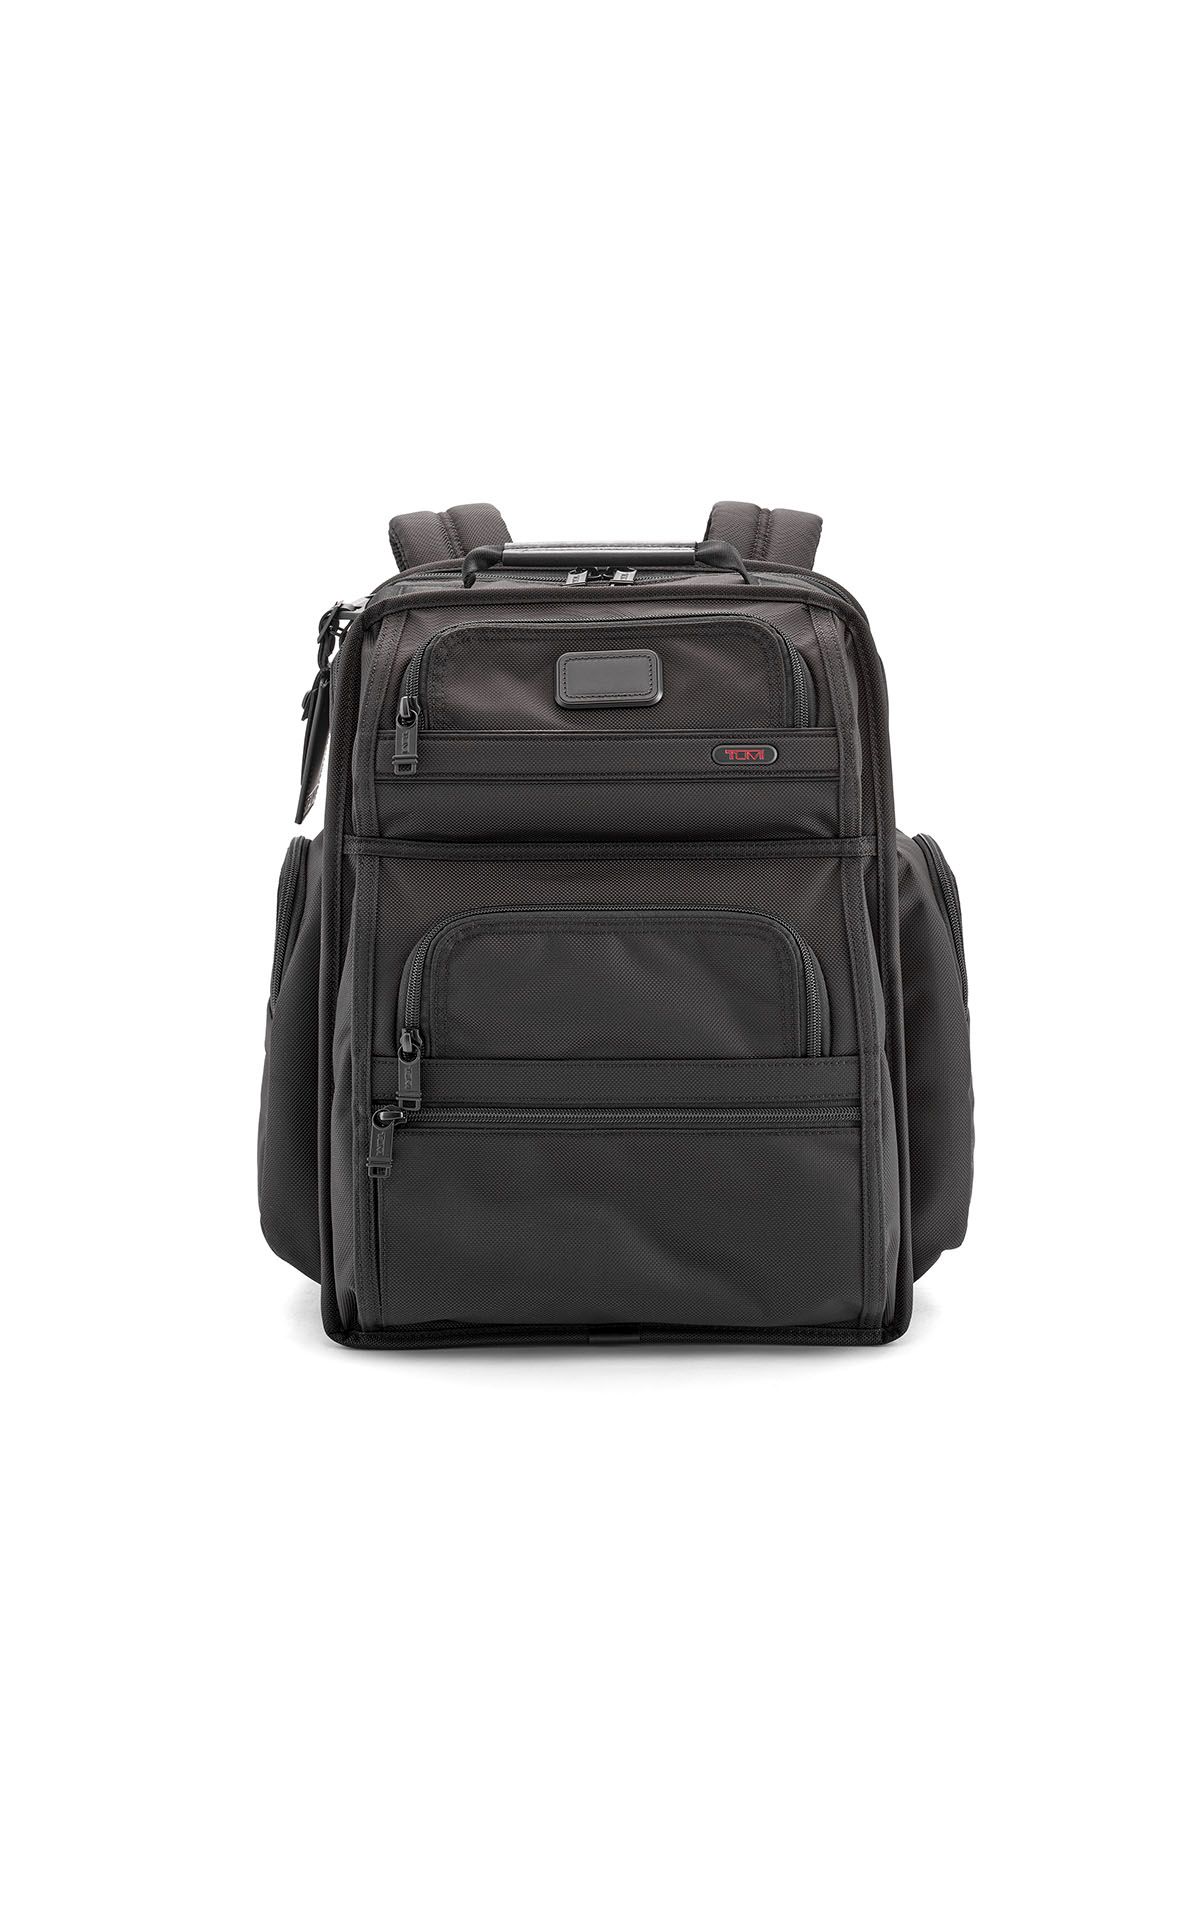 Tumi Brief Pack at The Bicester Village Shopping Collection